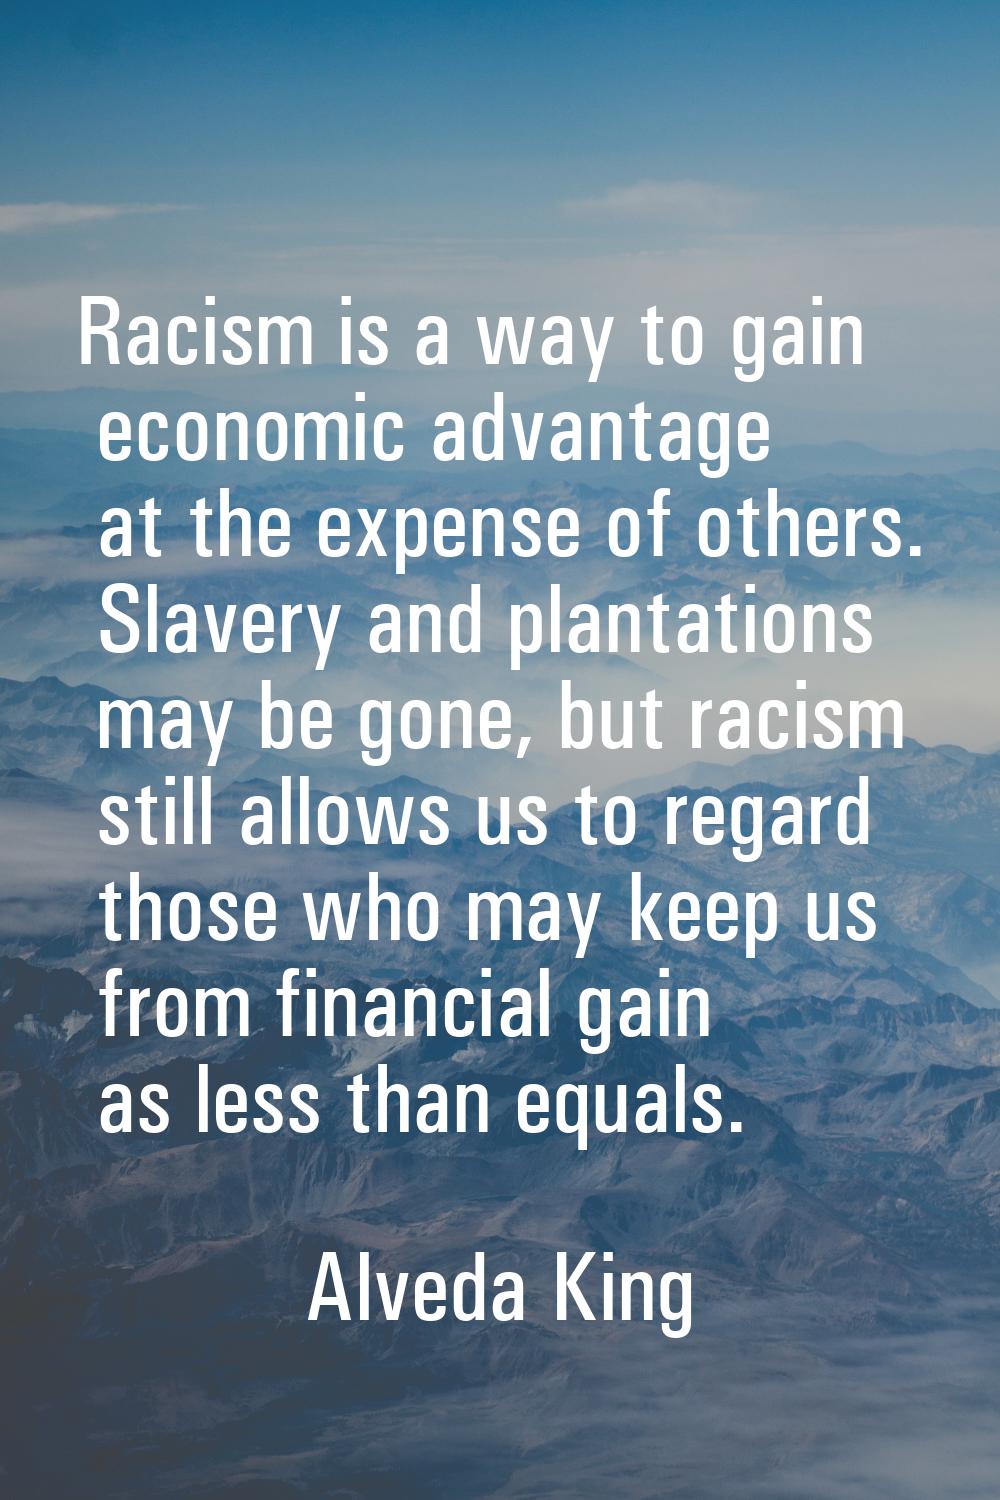 Racism is a way to gain economic advantage at the expense of others. Slavery and plantations may be